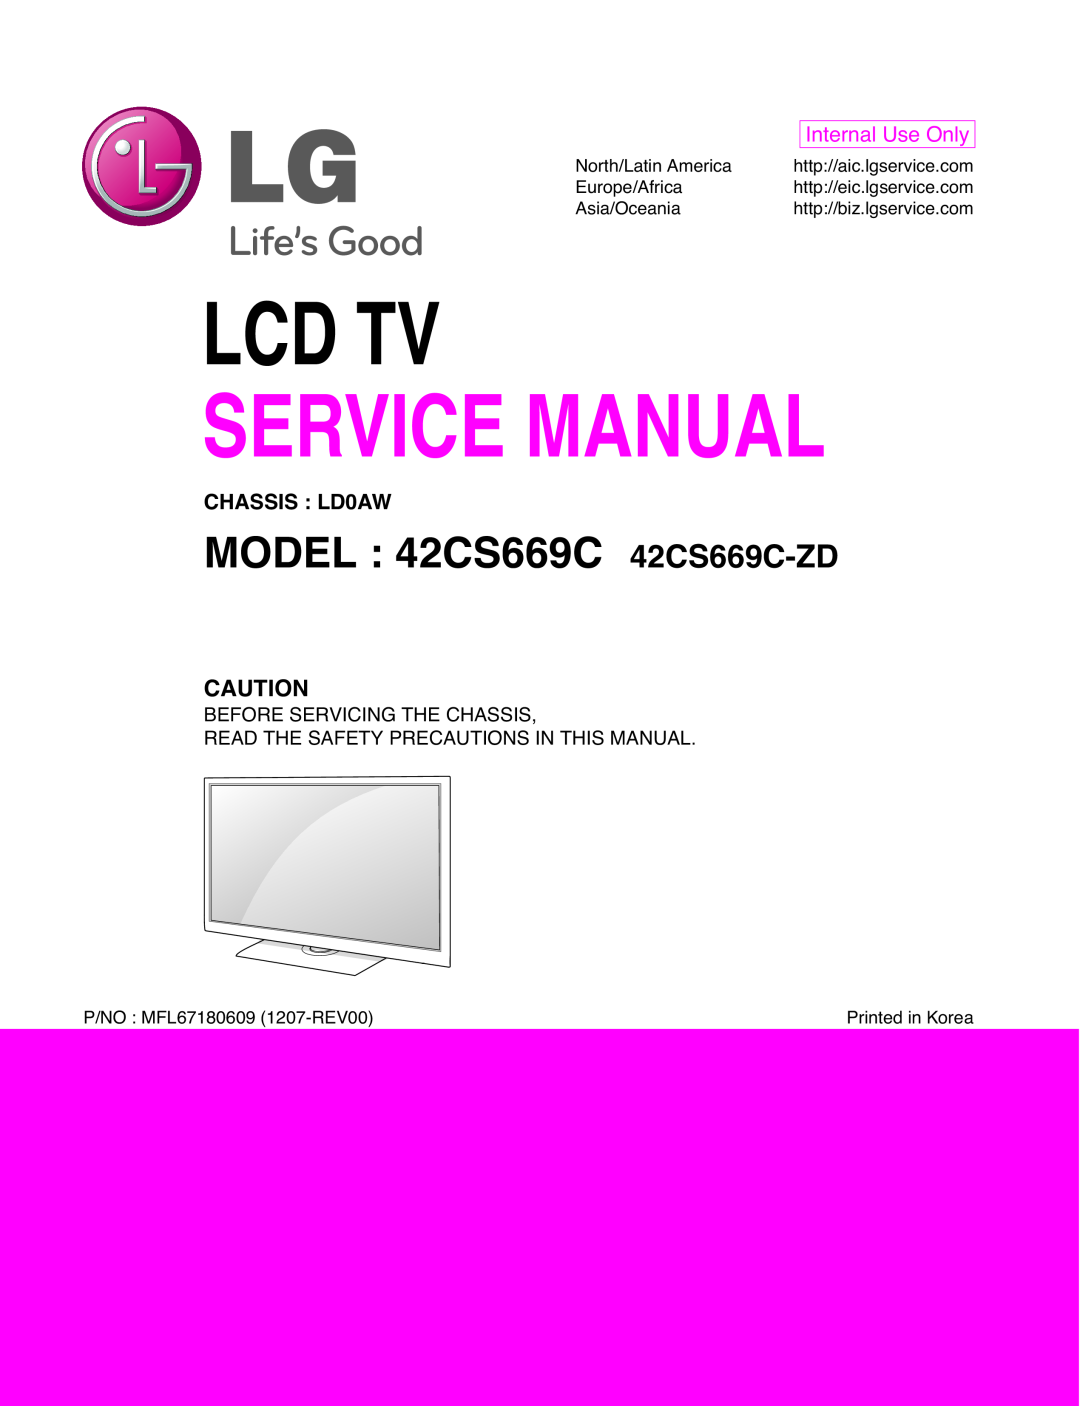 LG Electronics service manual CHASSIS LD0AW, Lcd Tv, Service Manual, MODEL 42CS669C 42CS669C-ZD, Internal Use Only 